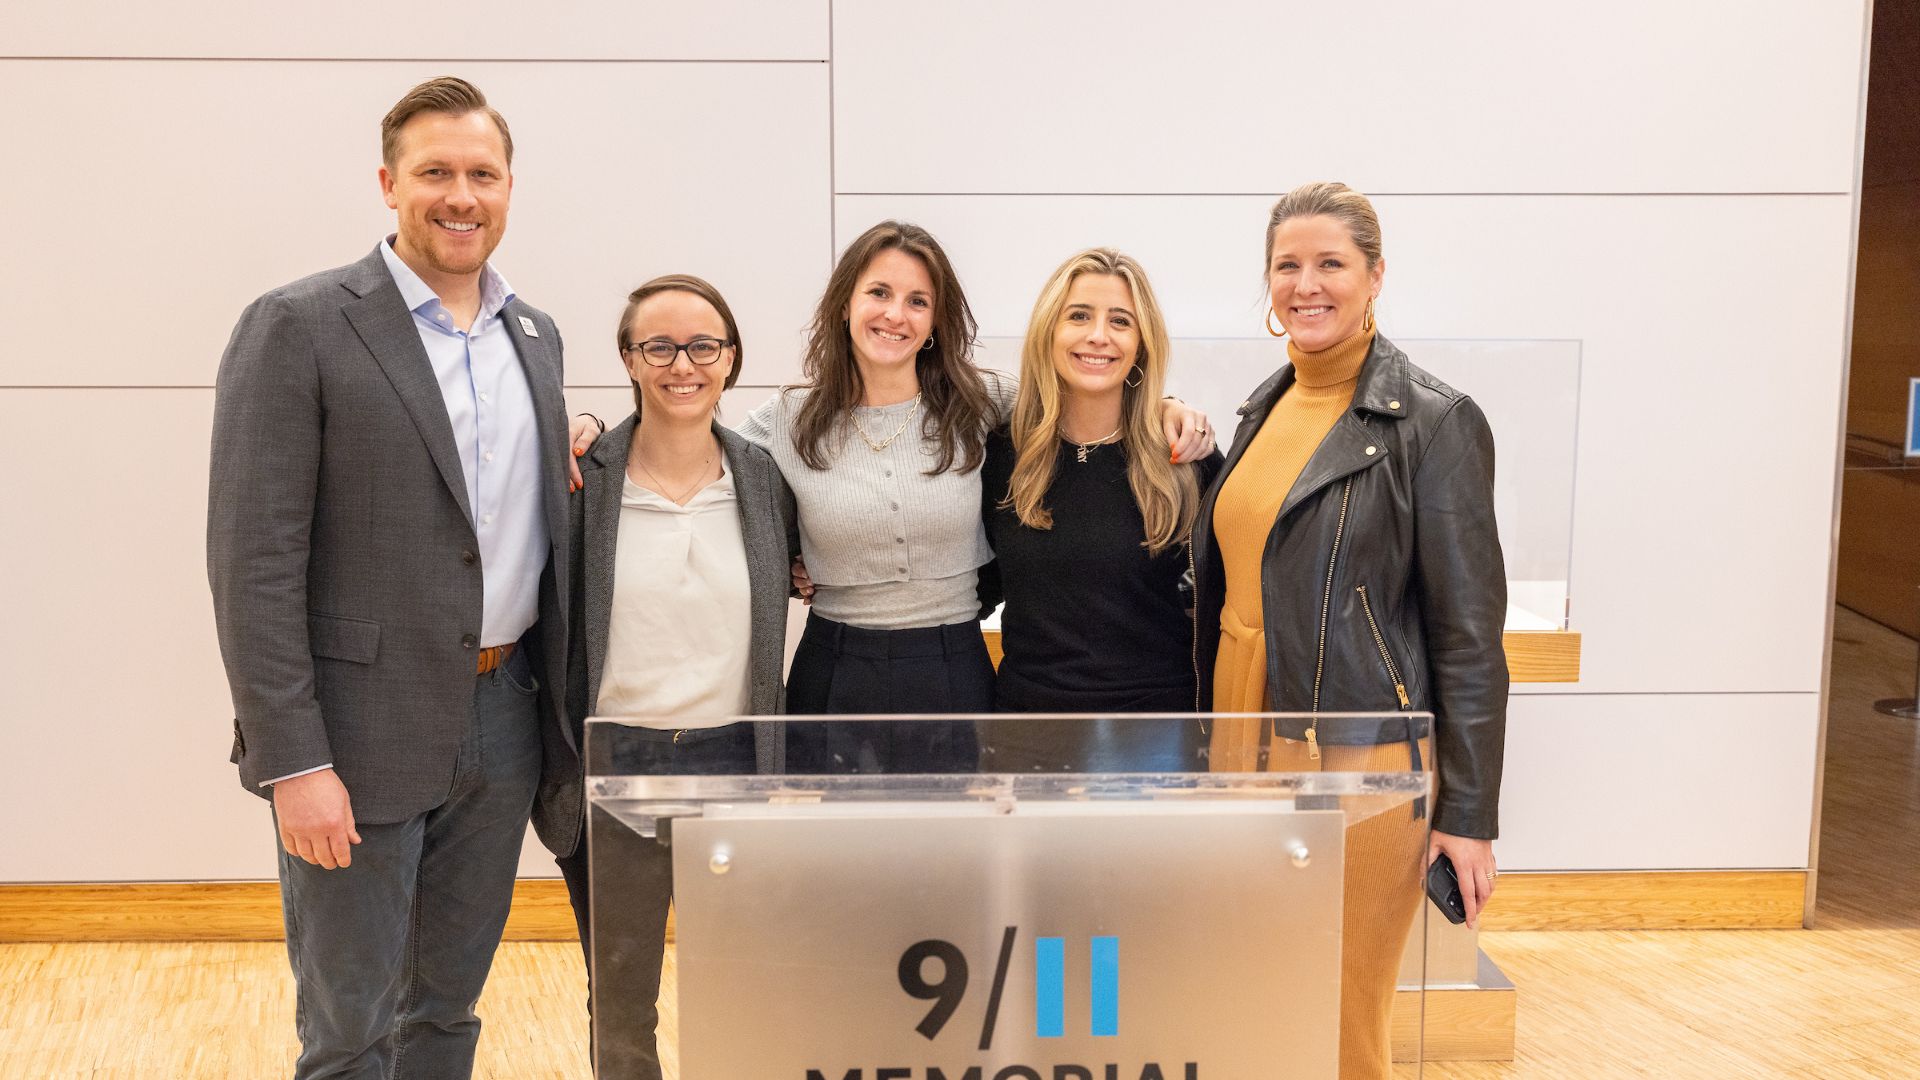 Five smiling people at a 9/11 Memorial podium inside the Museum